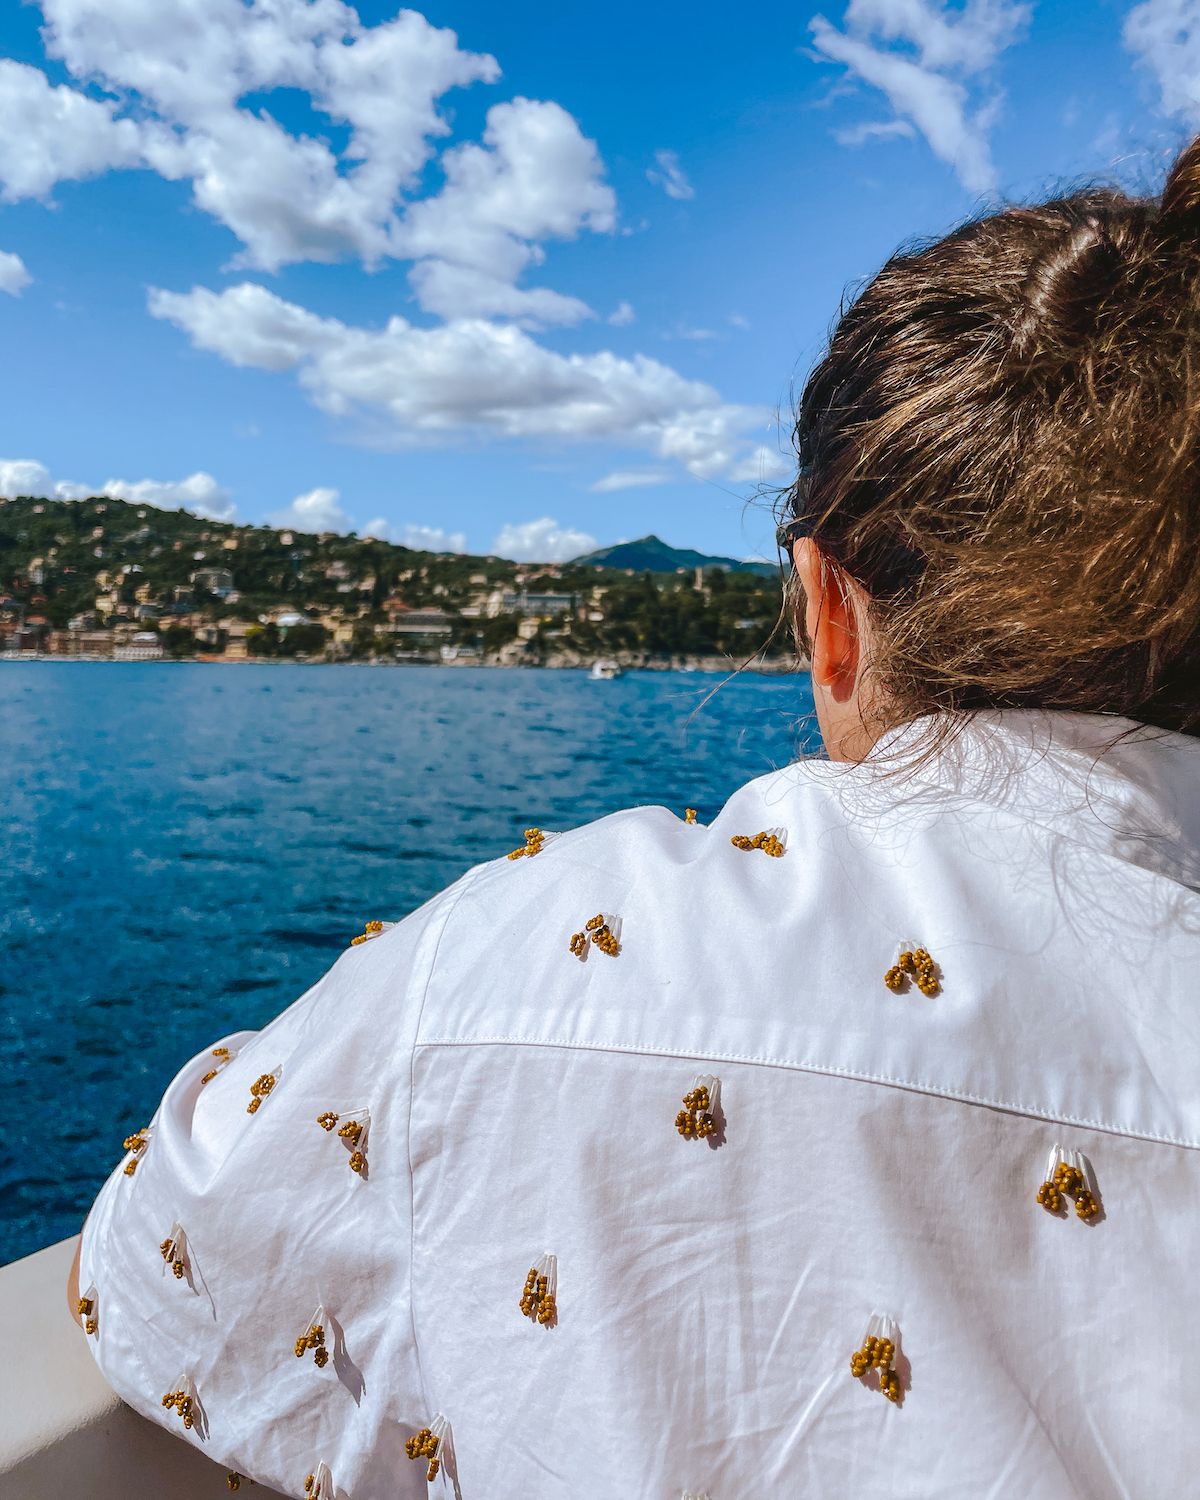 Man in white shirt with yellow beadwork in a boat looking out onto the blue Ligurian Sea